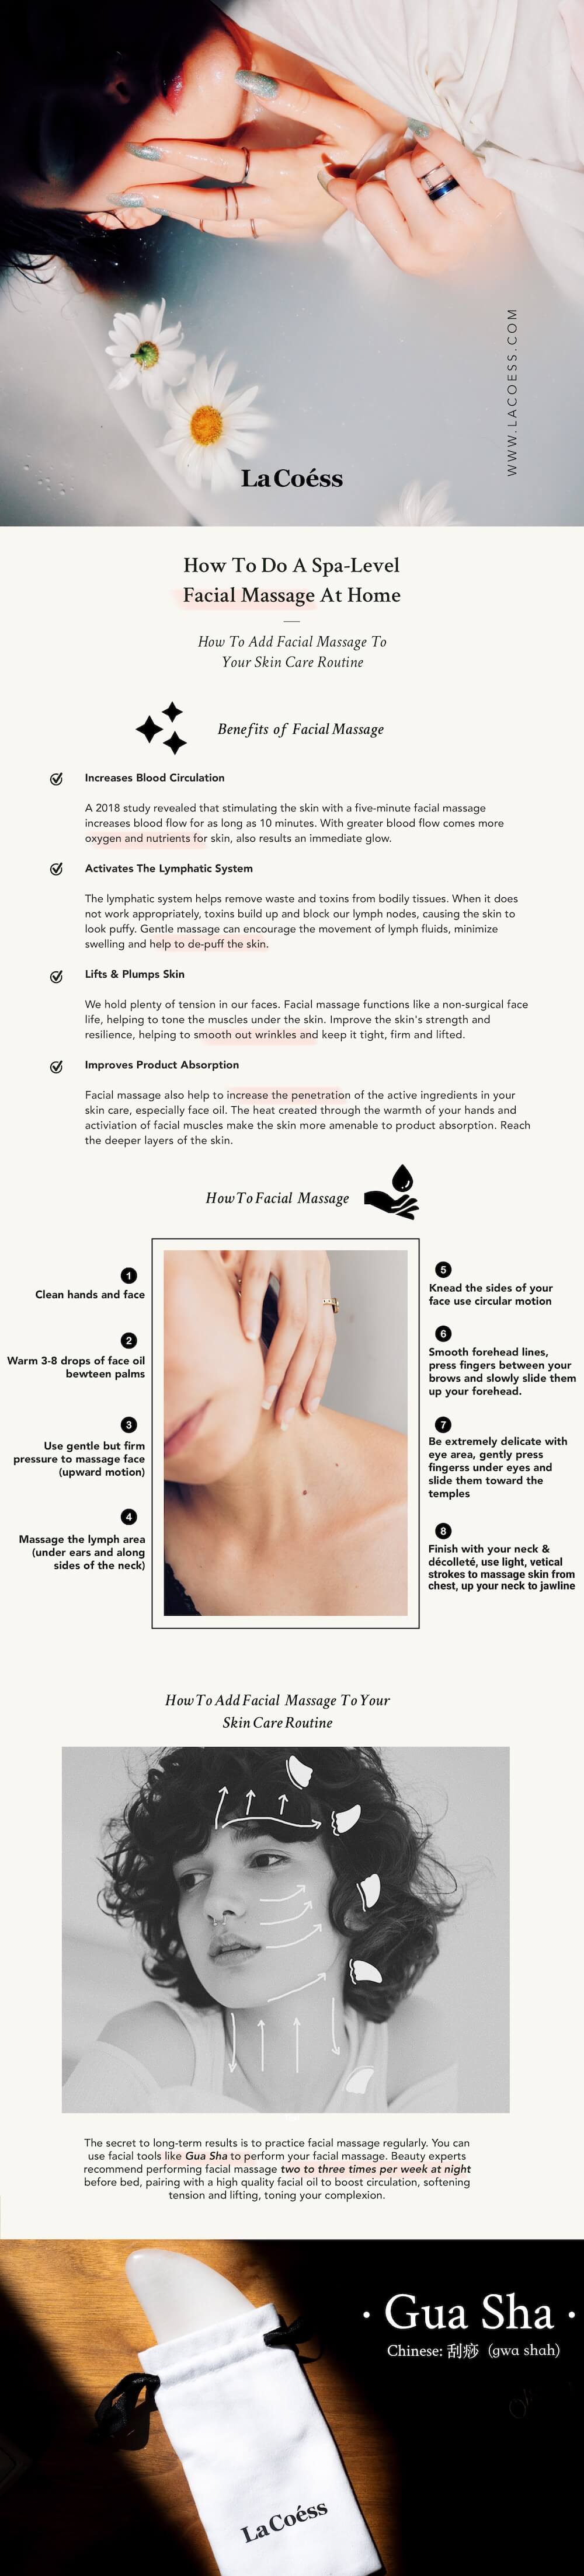 8 Simple Steps to a Spa-Level Facial Massage At Home